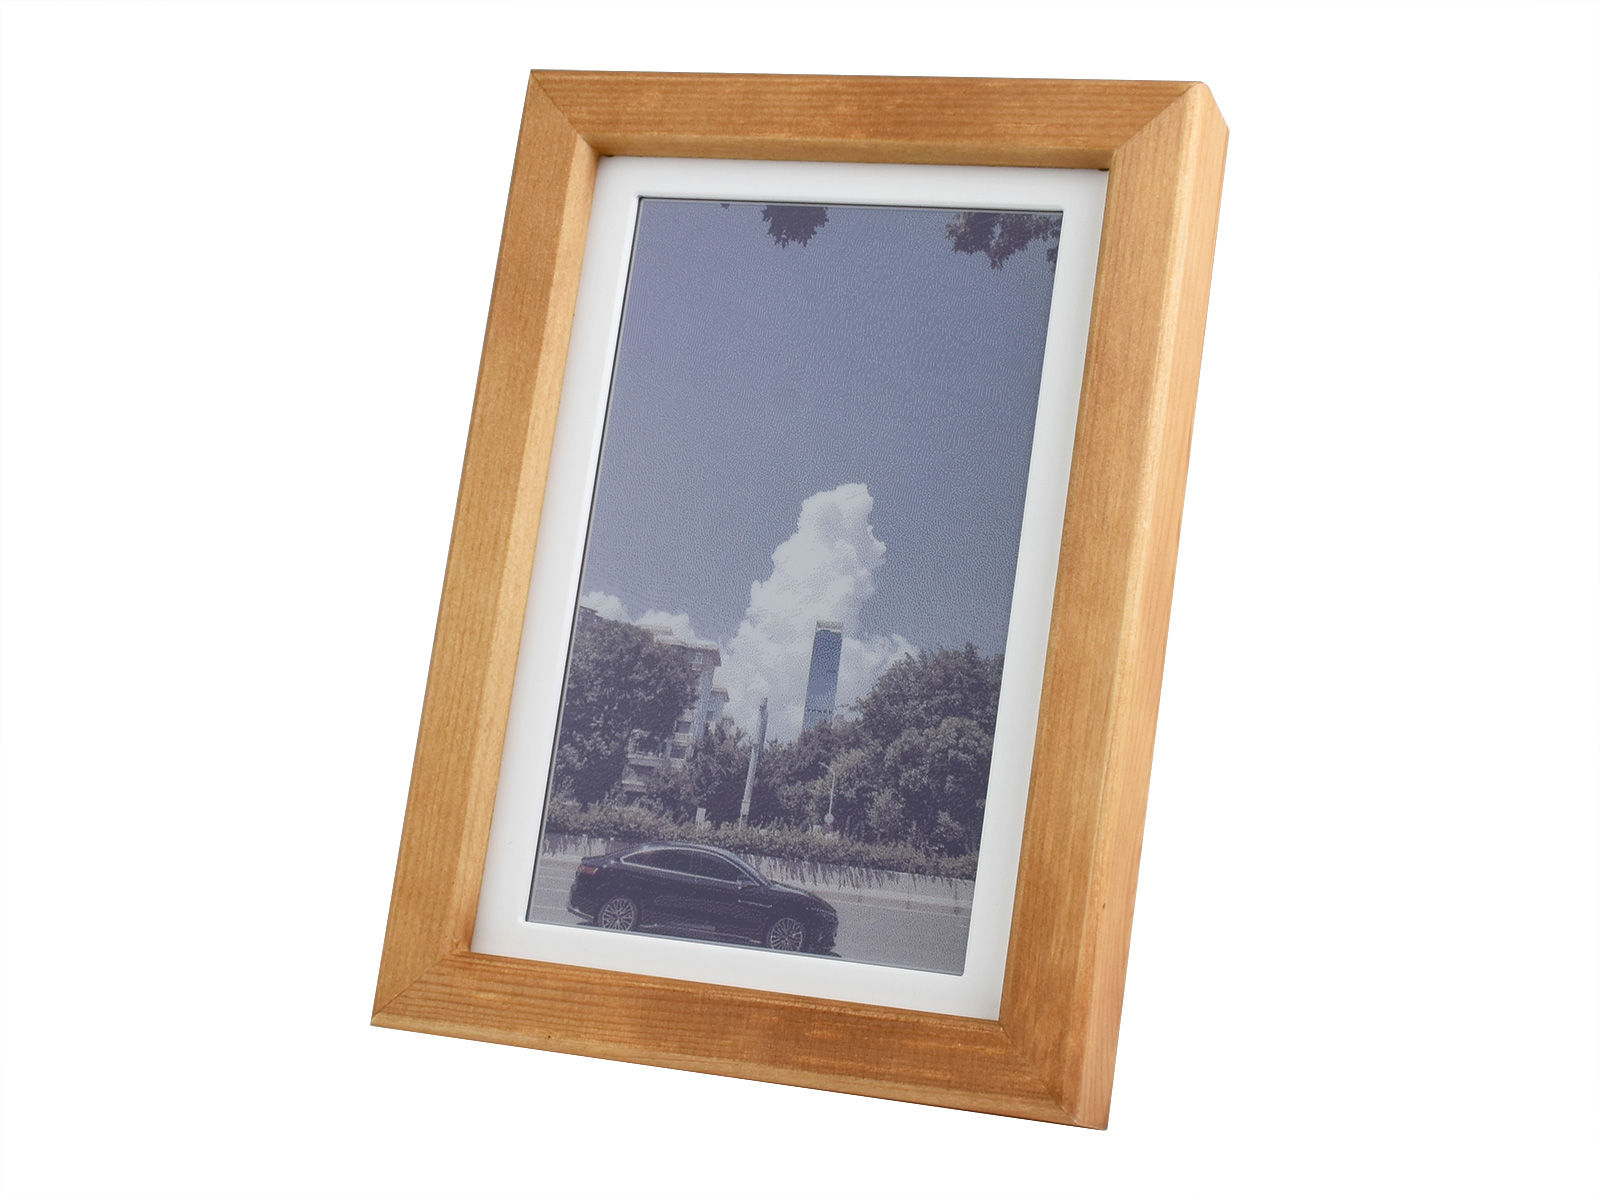 Making an Email-Powered E-Paper Picture Frame